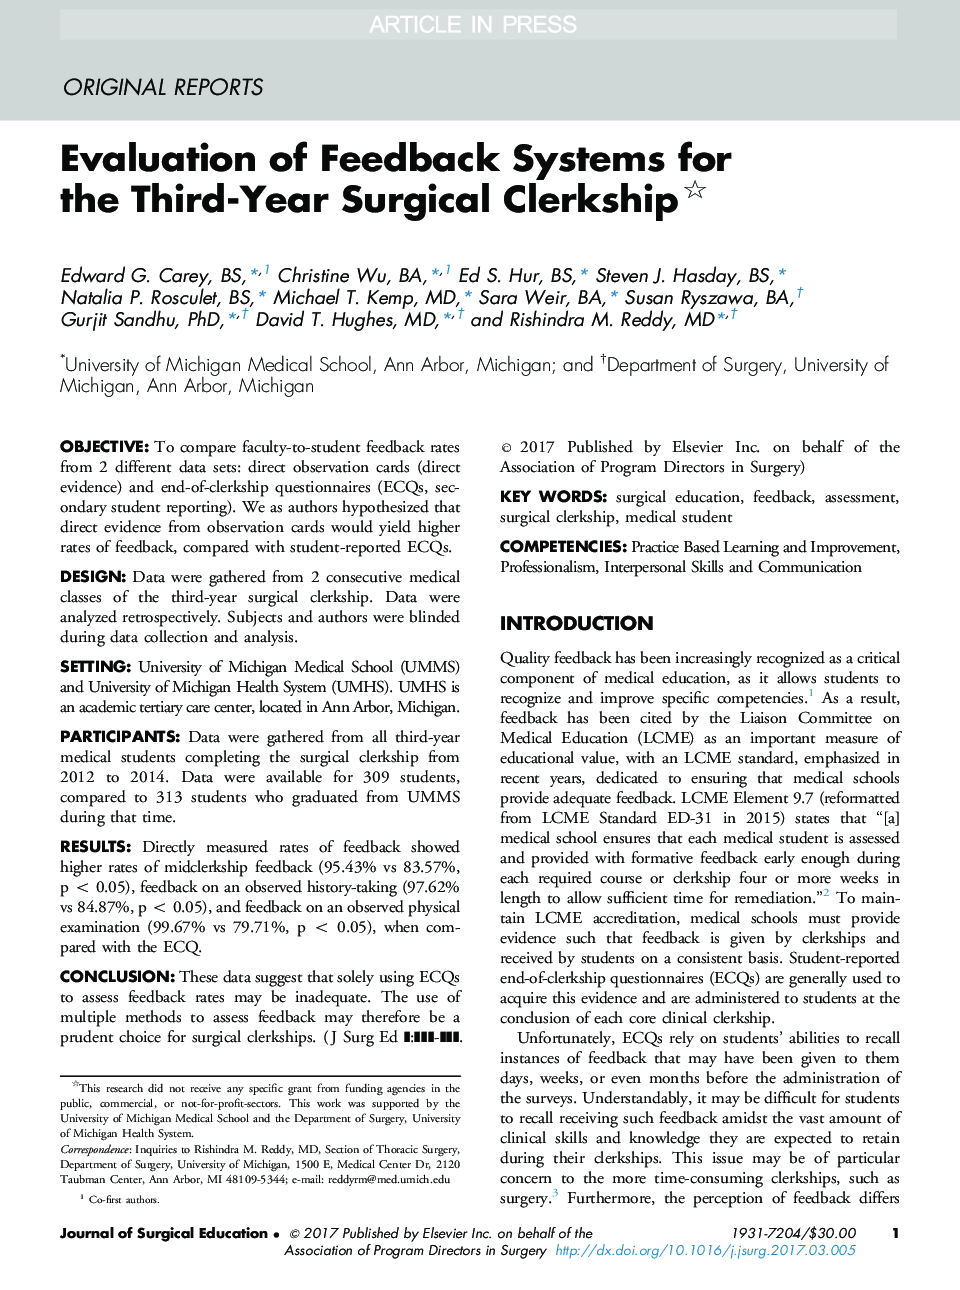 Evaluation of Feedback Systems for the Third-Year Surgical Clerkship